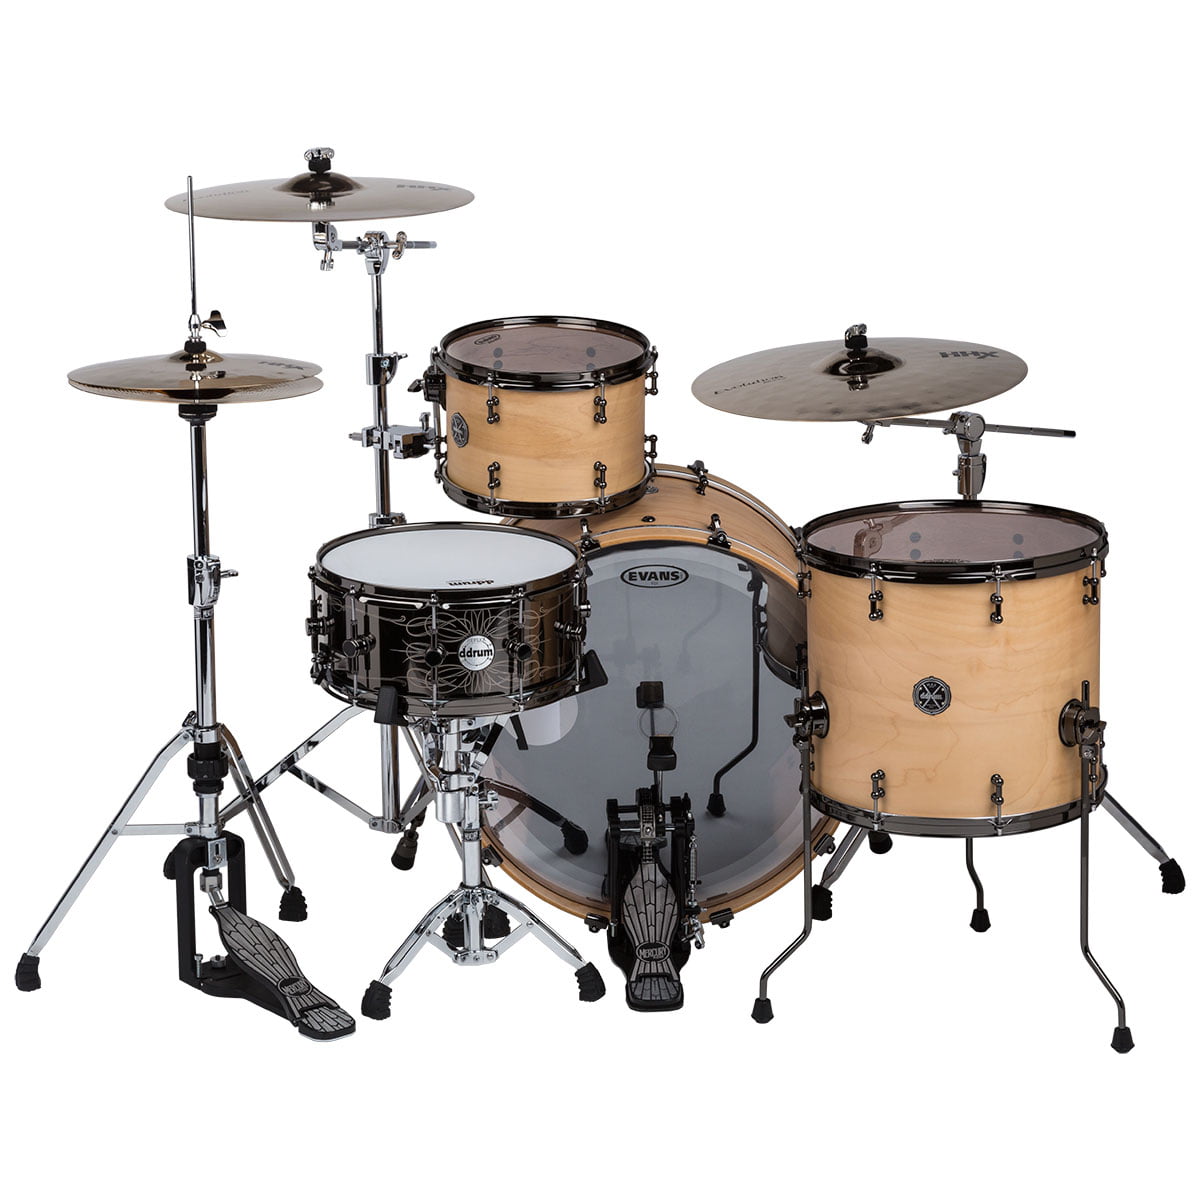 ddrum MAX Series 3-Piece Shell Pack - Satin Natural